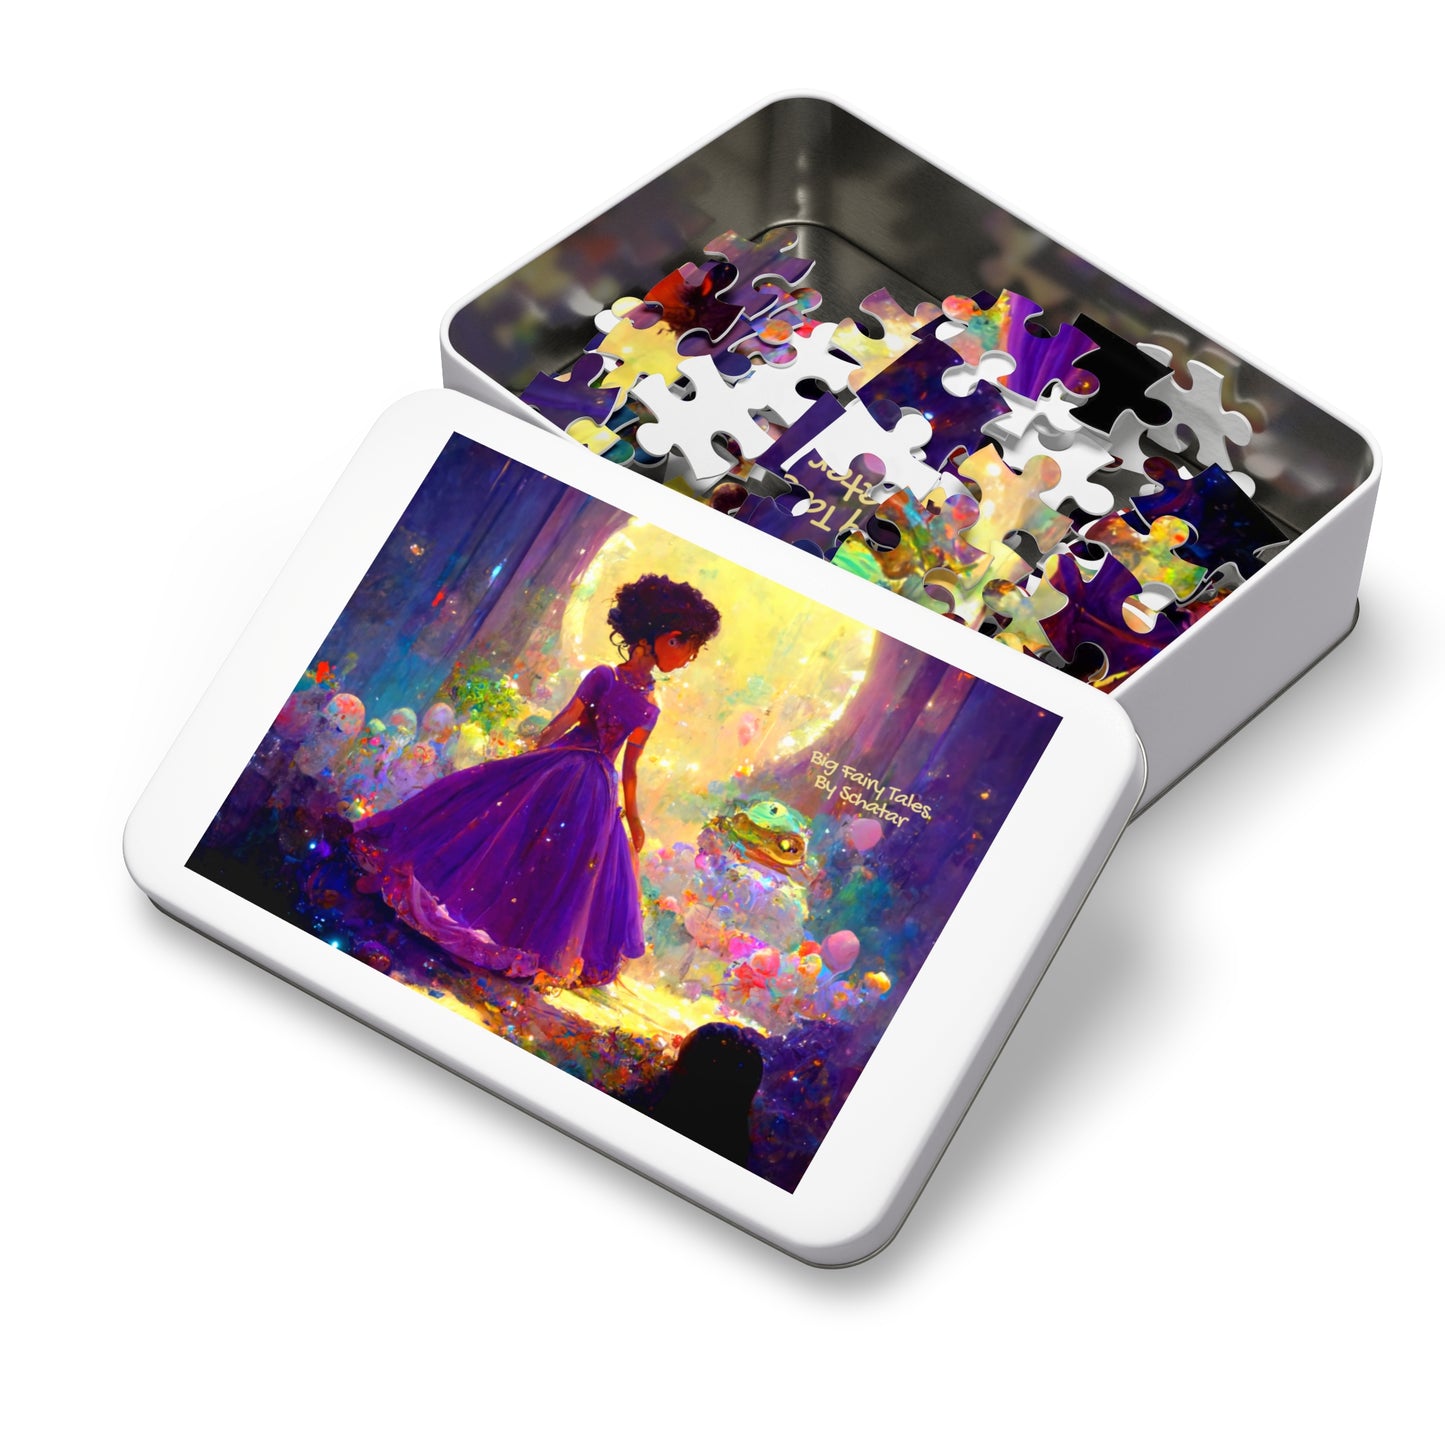 Big Fairy Tales By Schatar - Princess And Frog Prince Puzzle